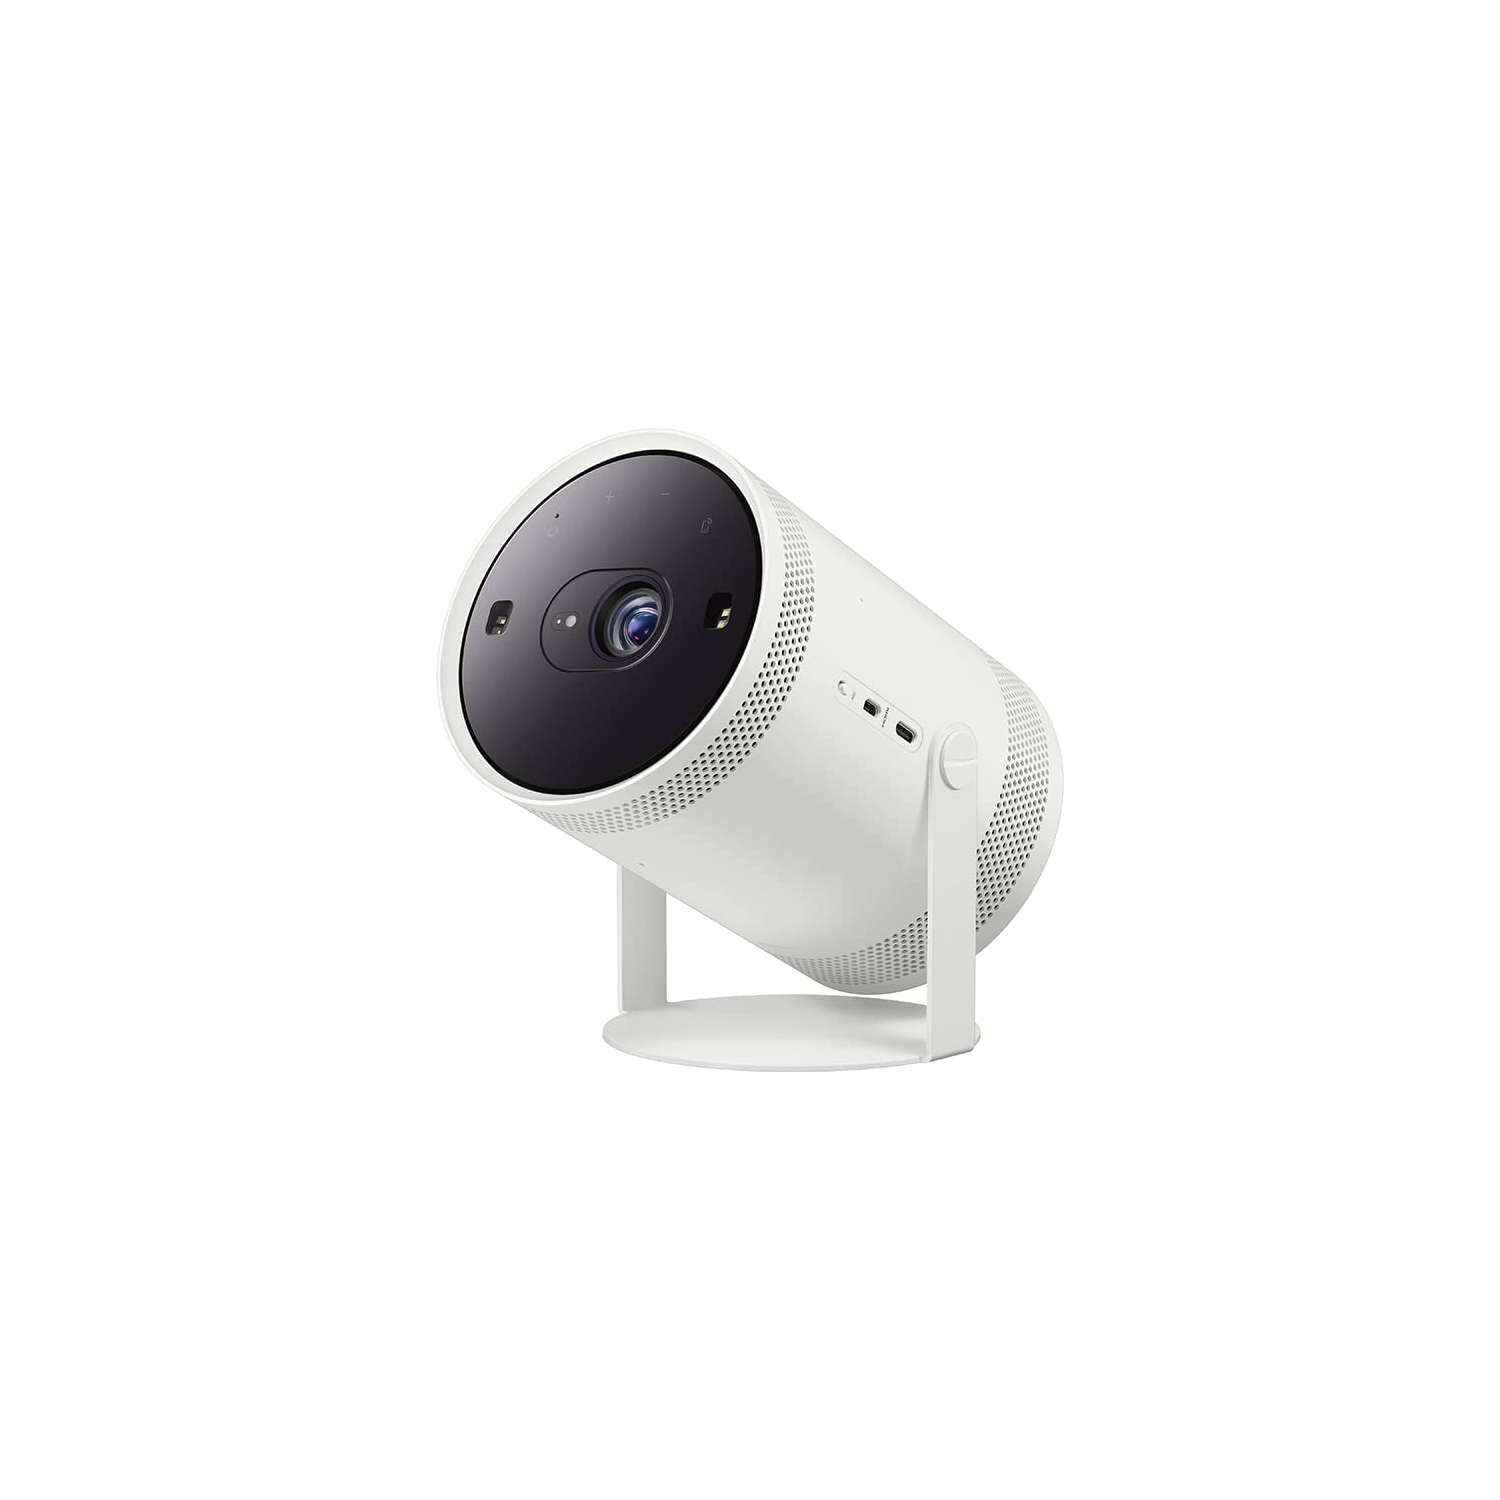 SAMSUNG The Freestyle Projector with Alexa Built-in (SP-LSP3BLAXZC, 2022 Model, Canada Version) - Open Box - 10/10 Condition